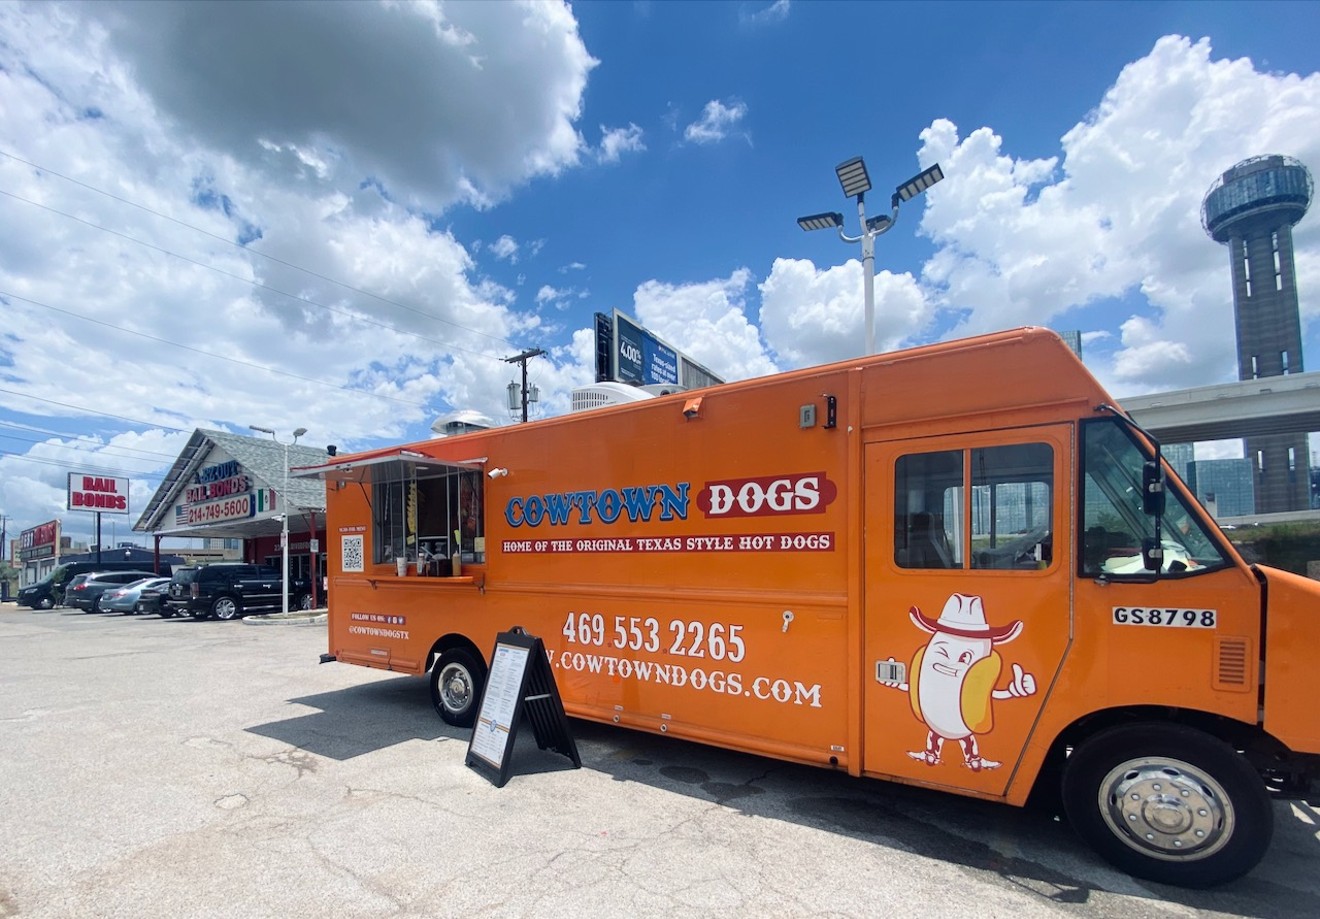 For National Hot Dog Day, you can find Cowtown Dogs along Riverside Drive.